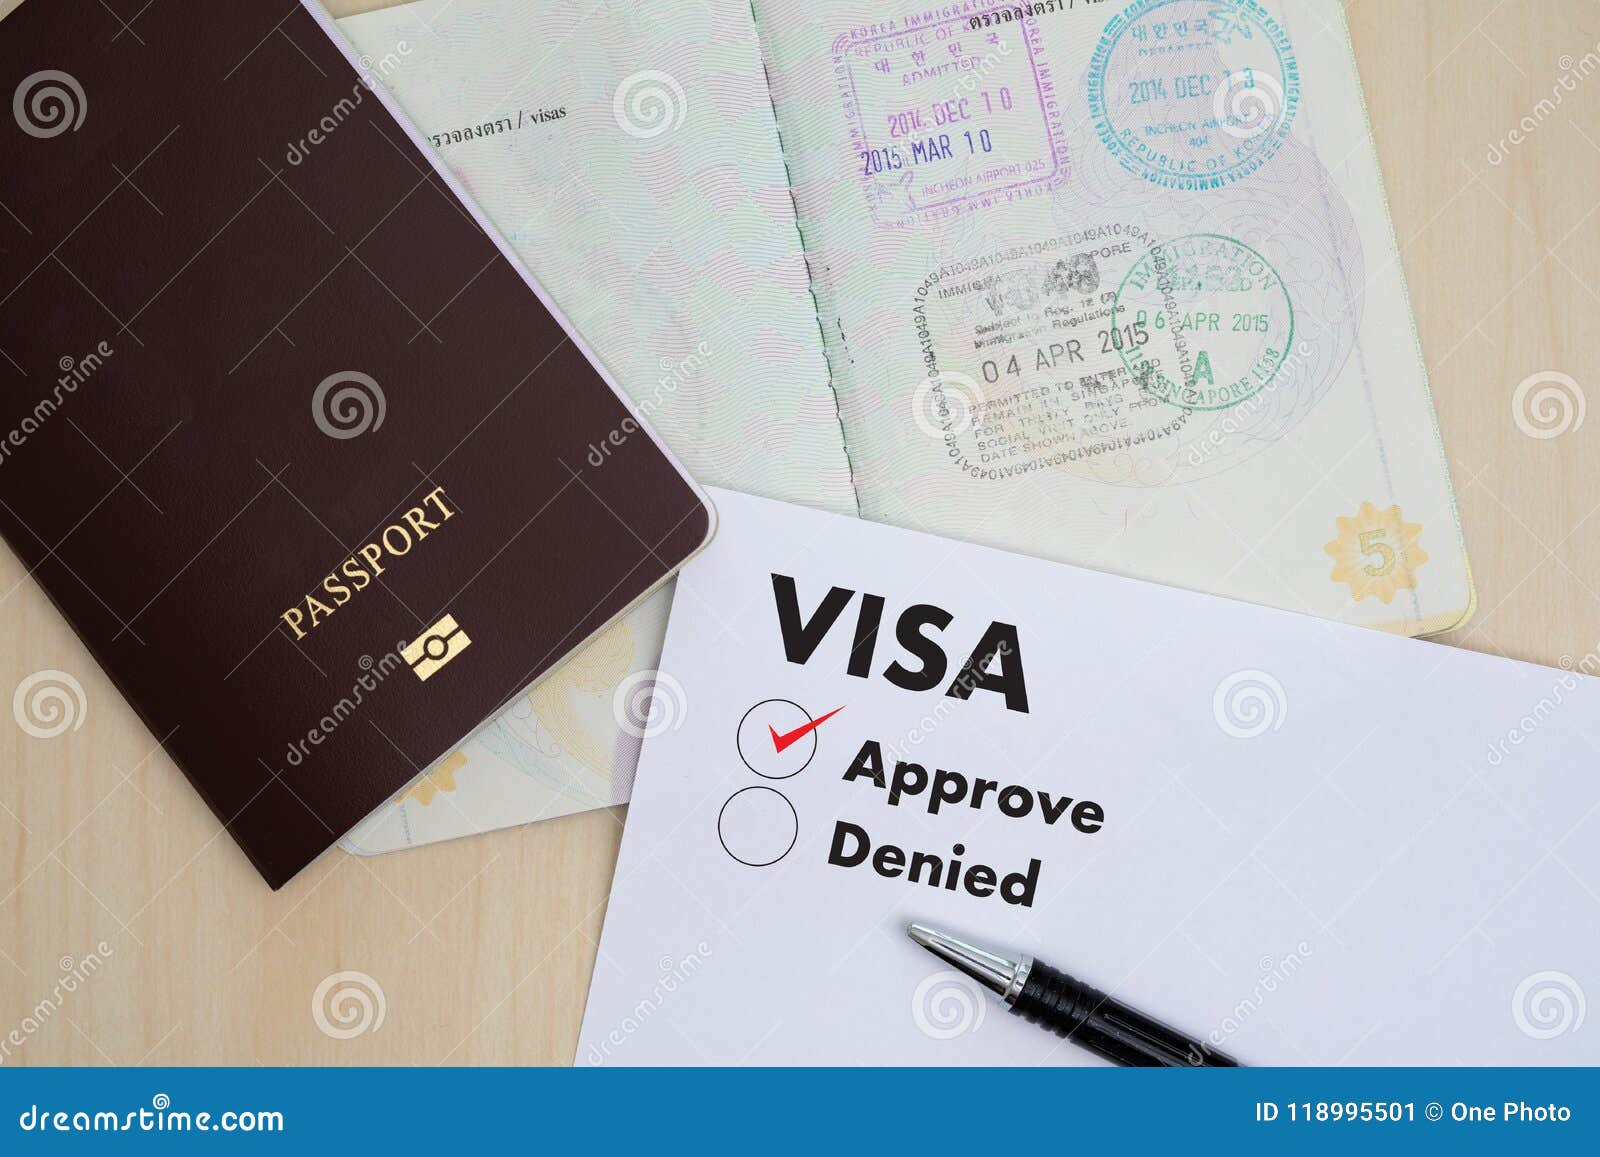 visa application form to travel immigration a document money for